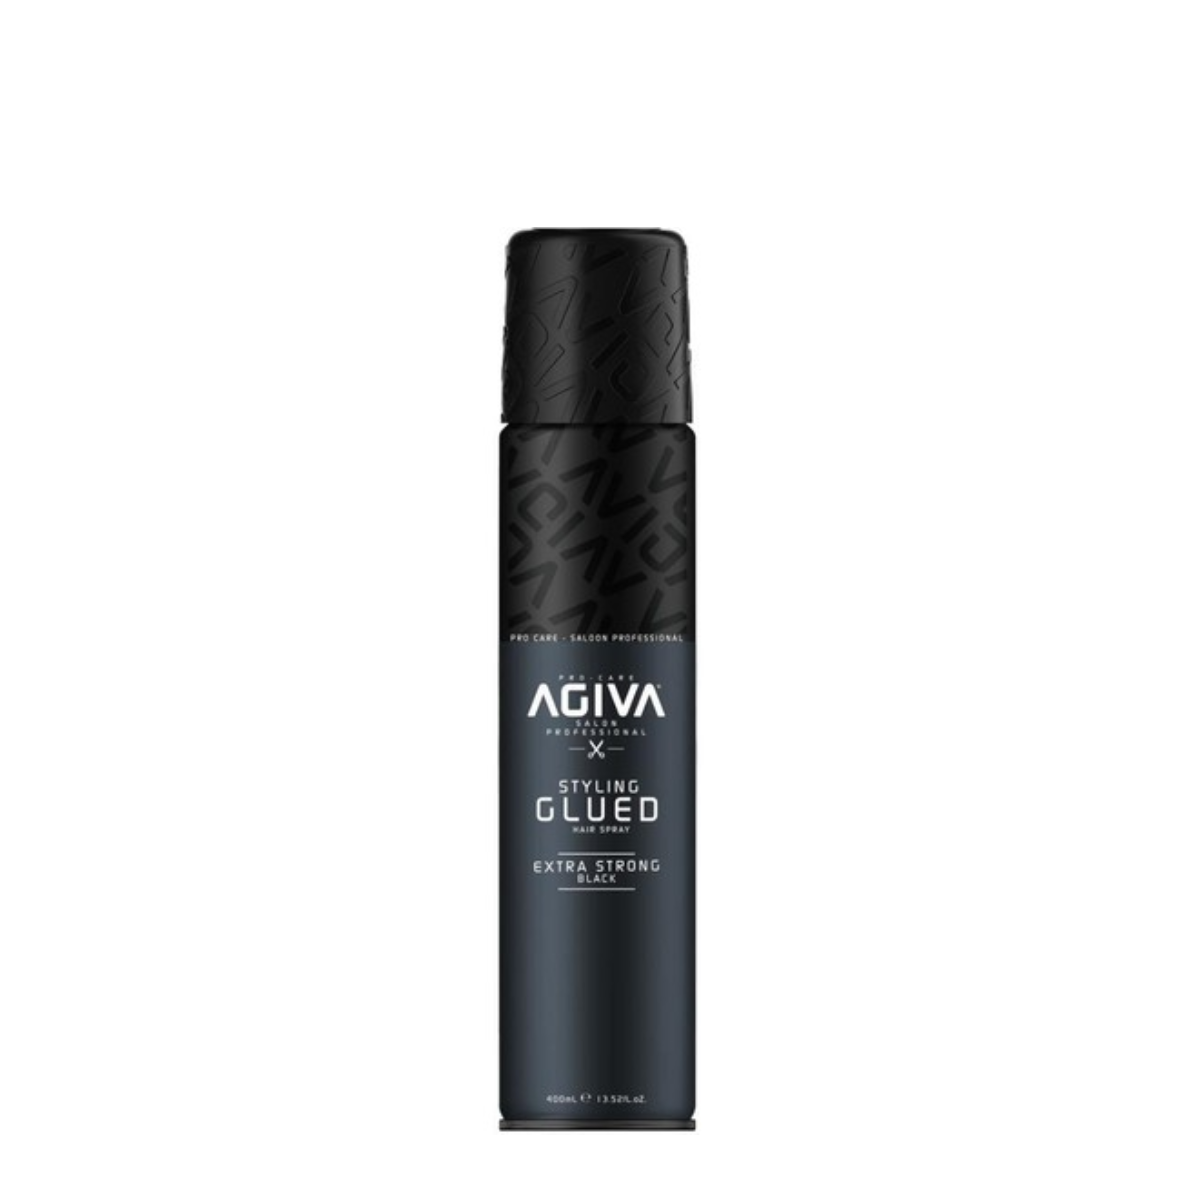 AGIVA 2854 HAIR SPRAY STYLING GLUED 01 EXTRA STRONG BACK 400ML 2428